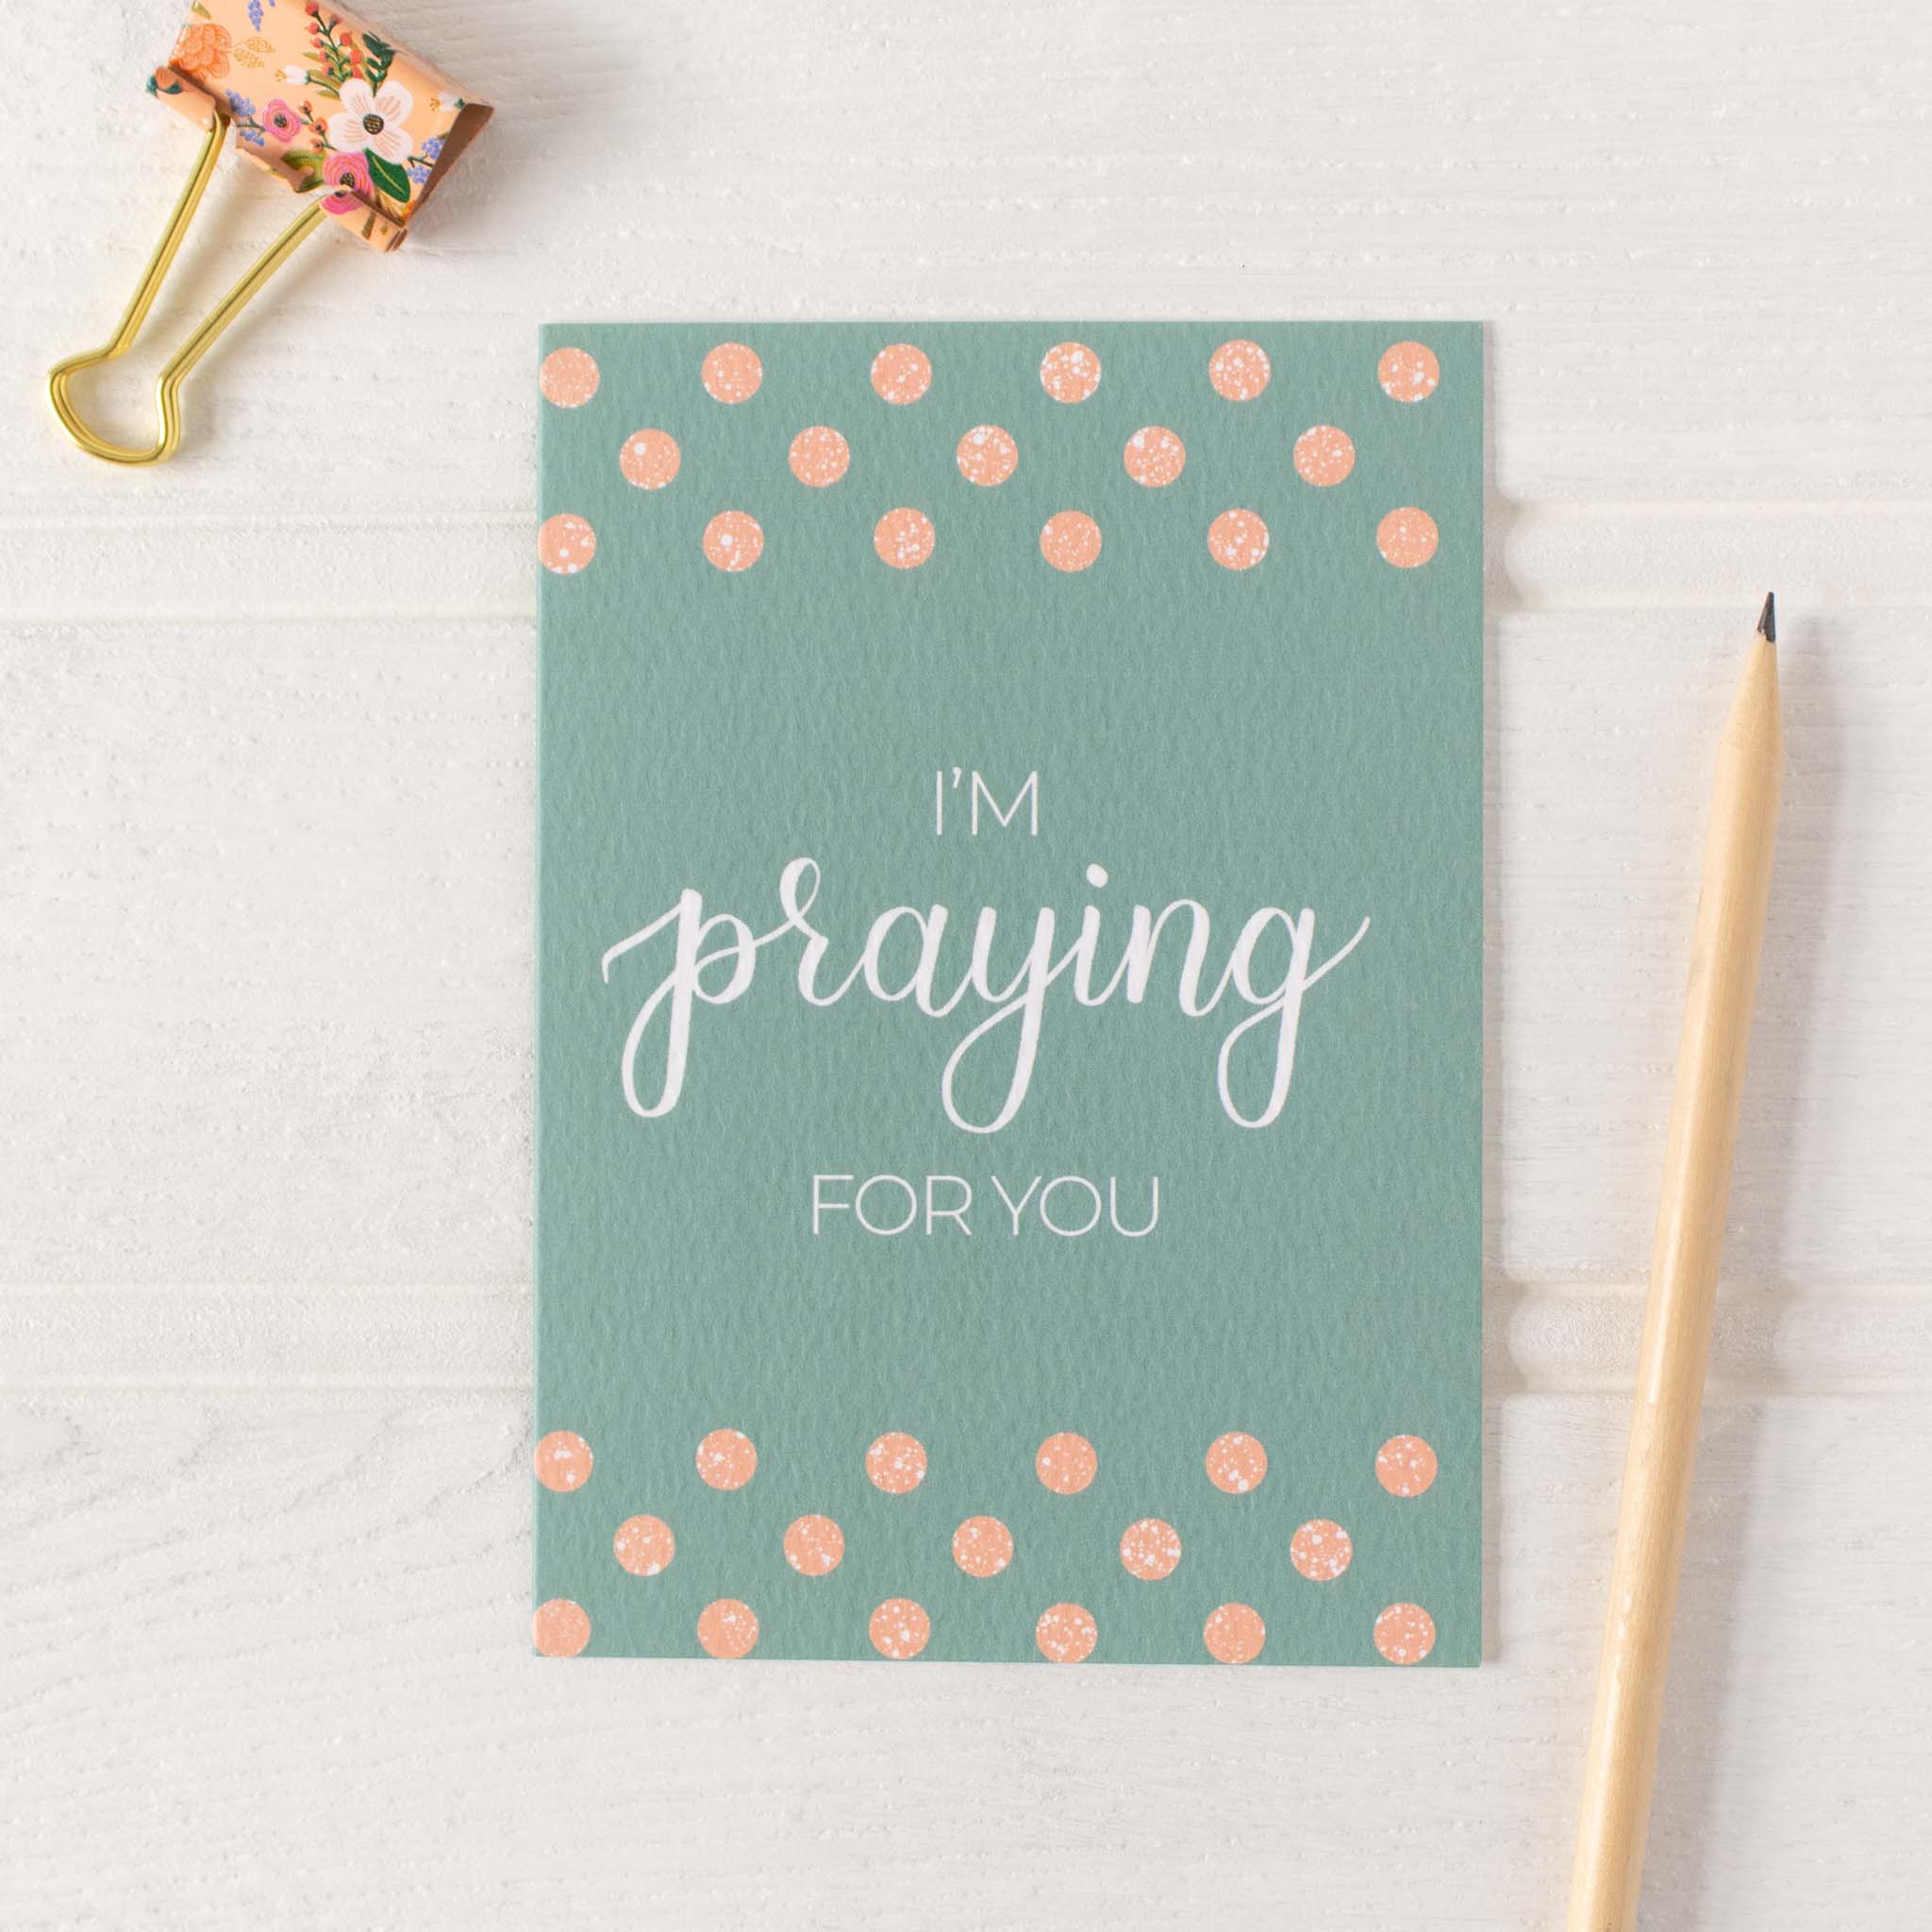 I'm Praying for You Card